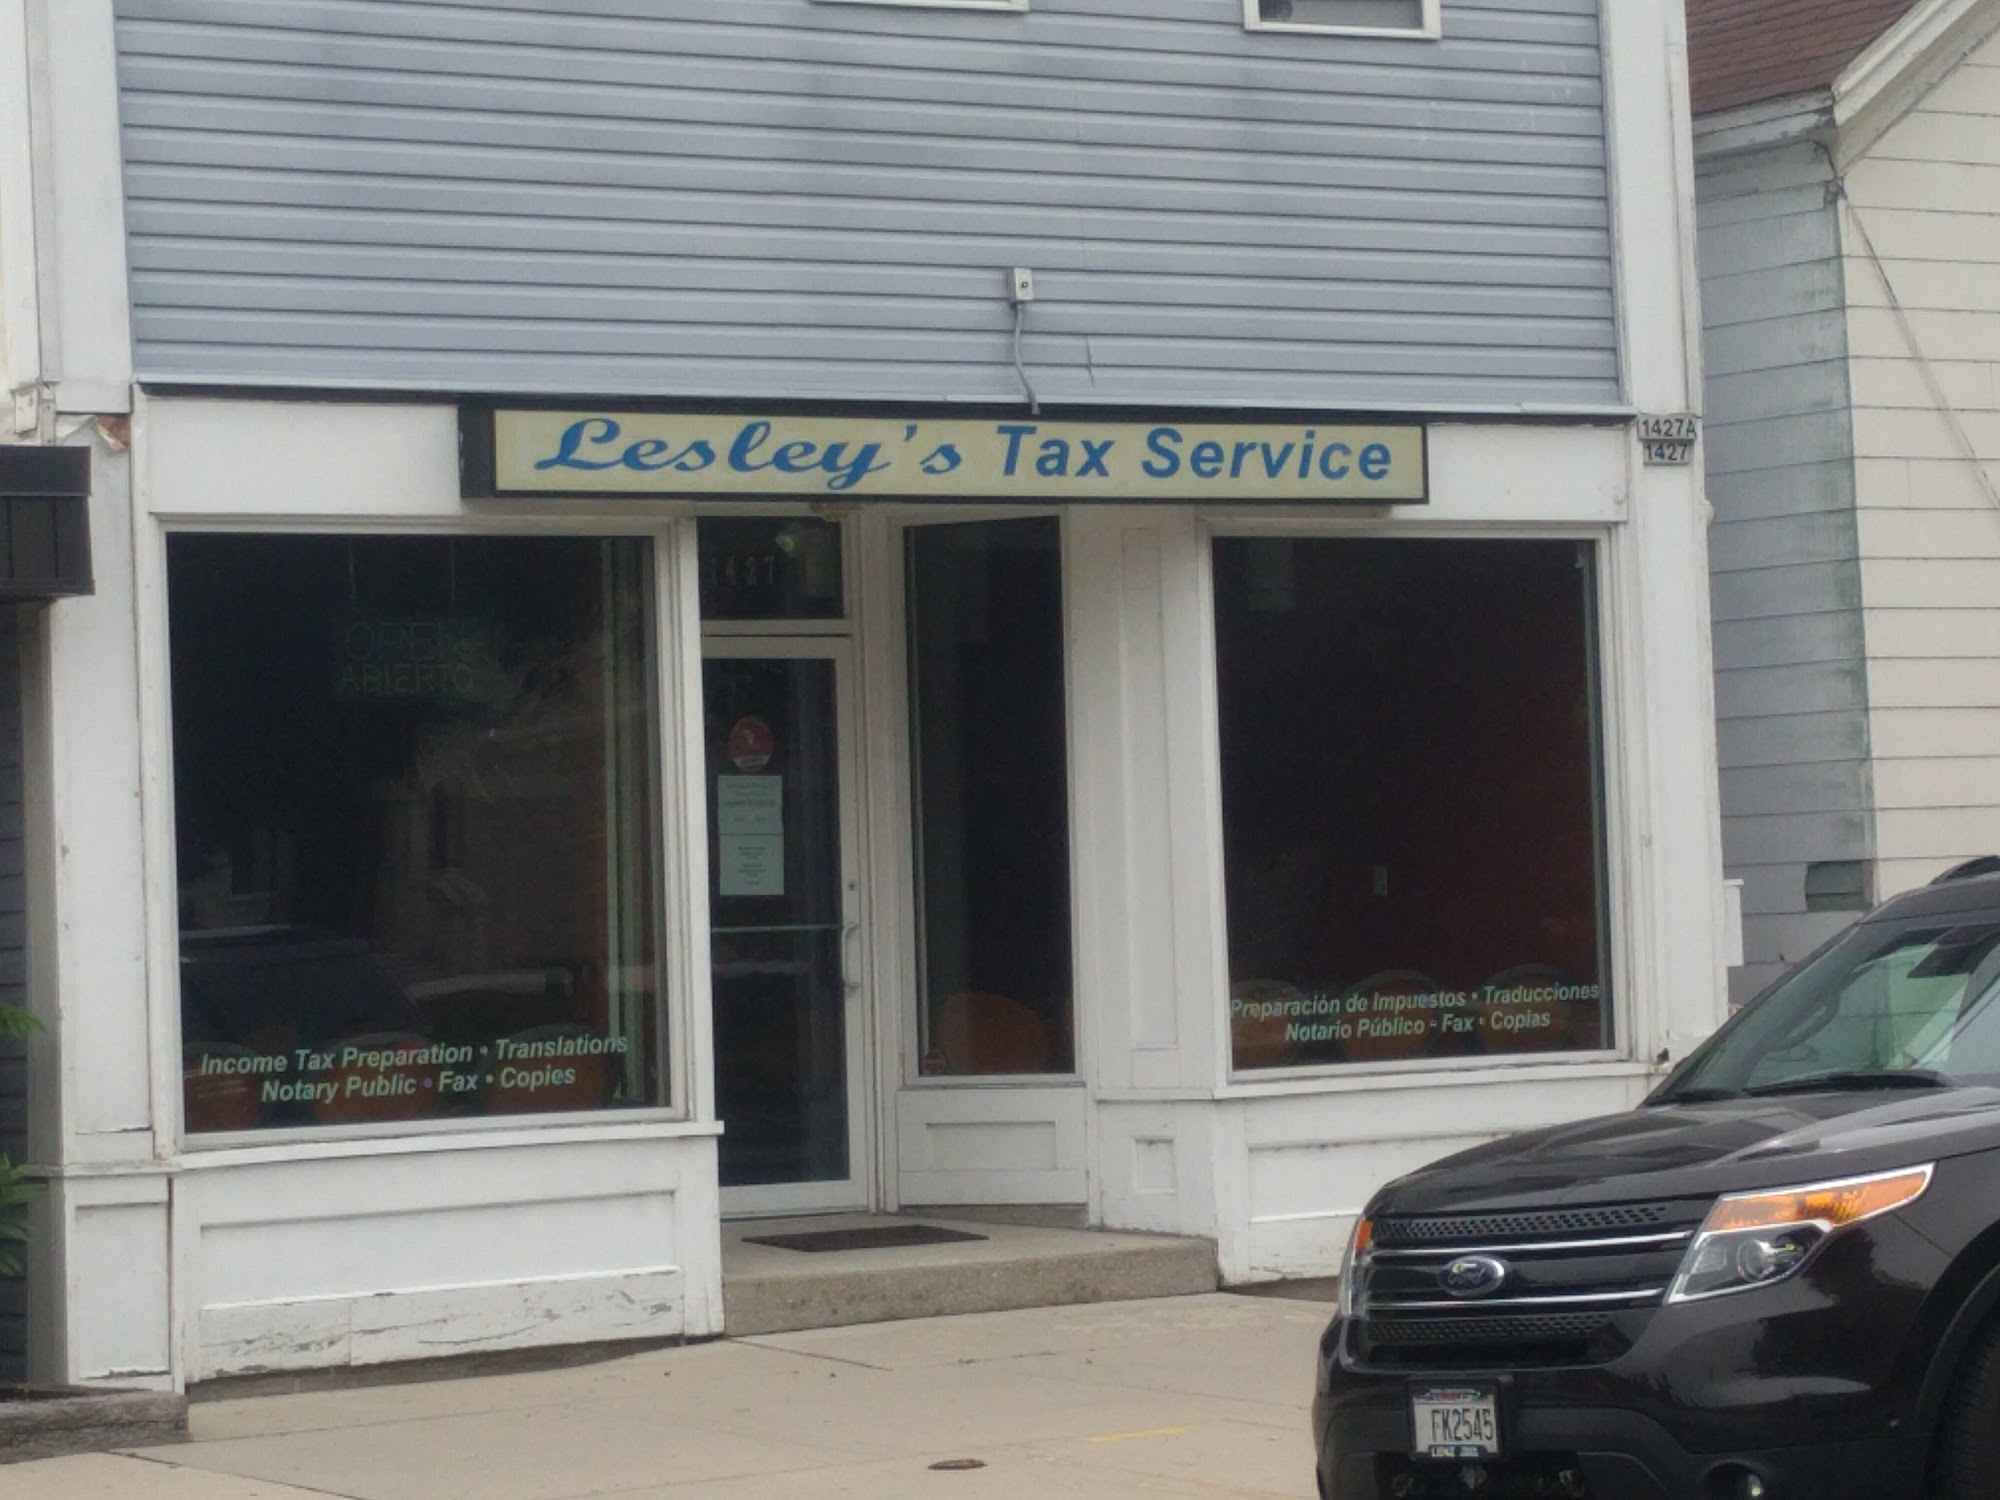 Lesley's Tax Service